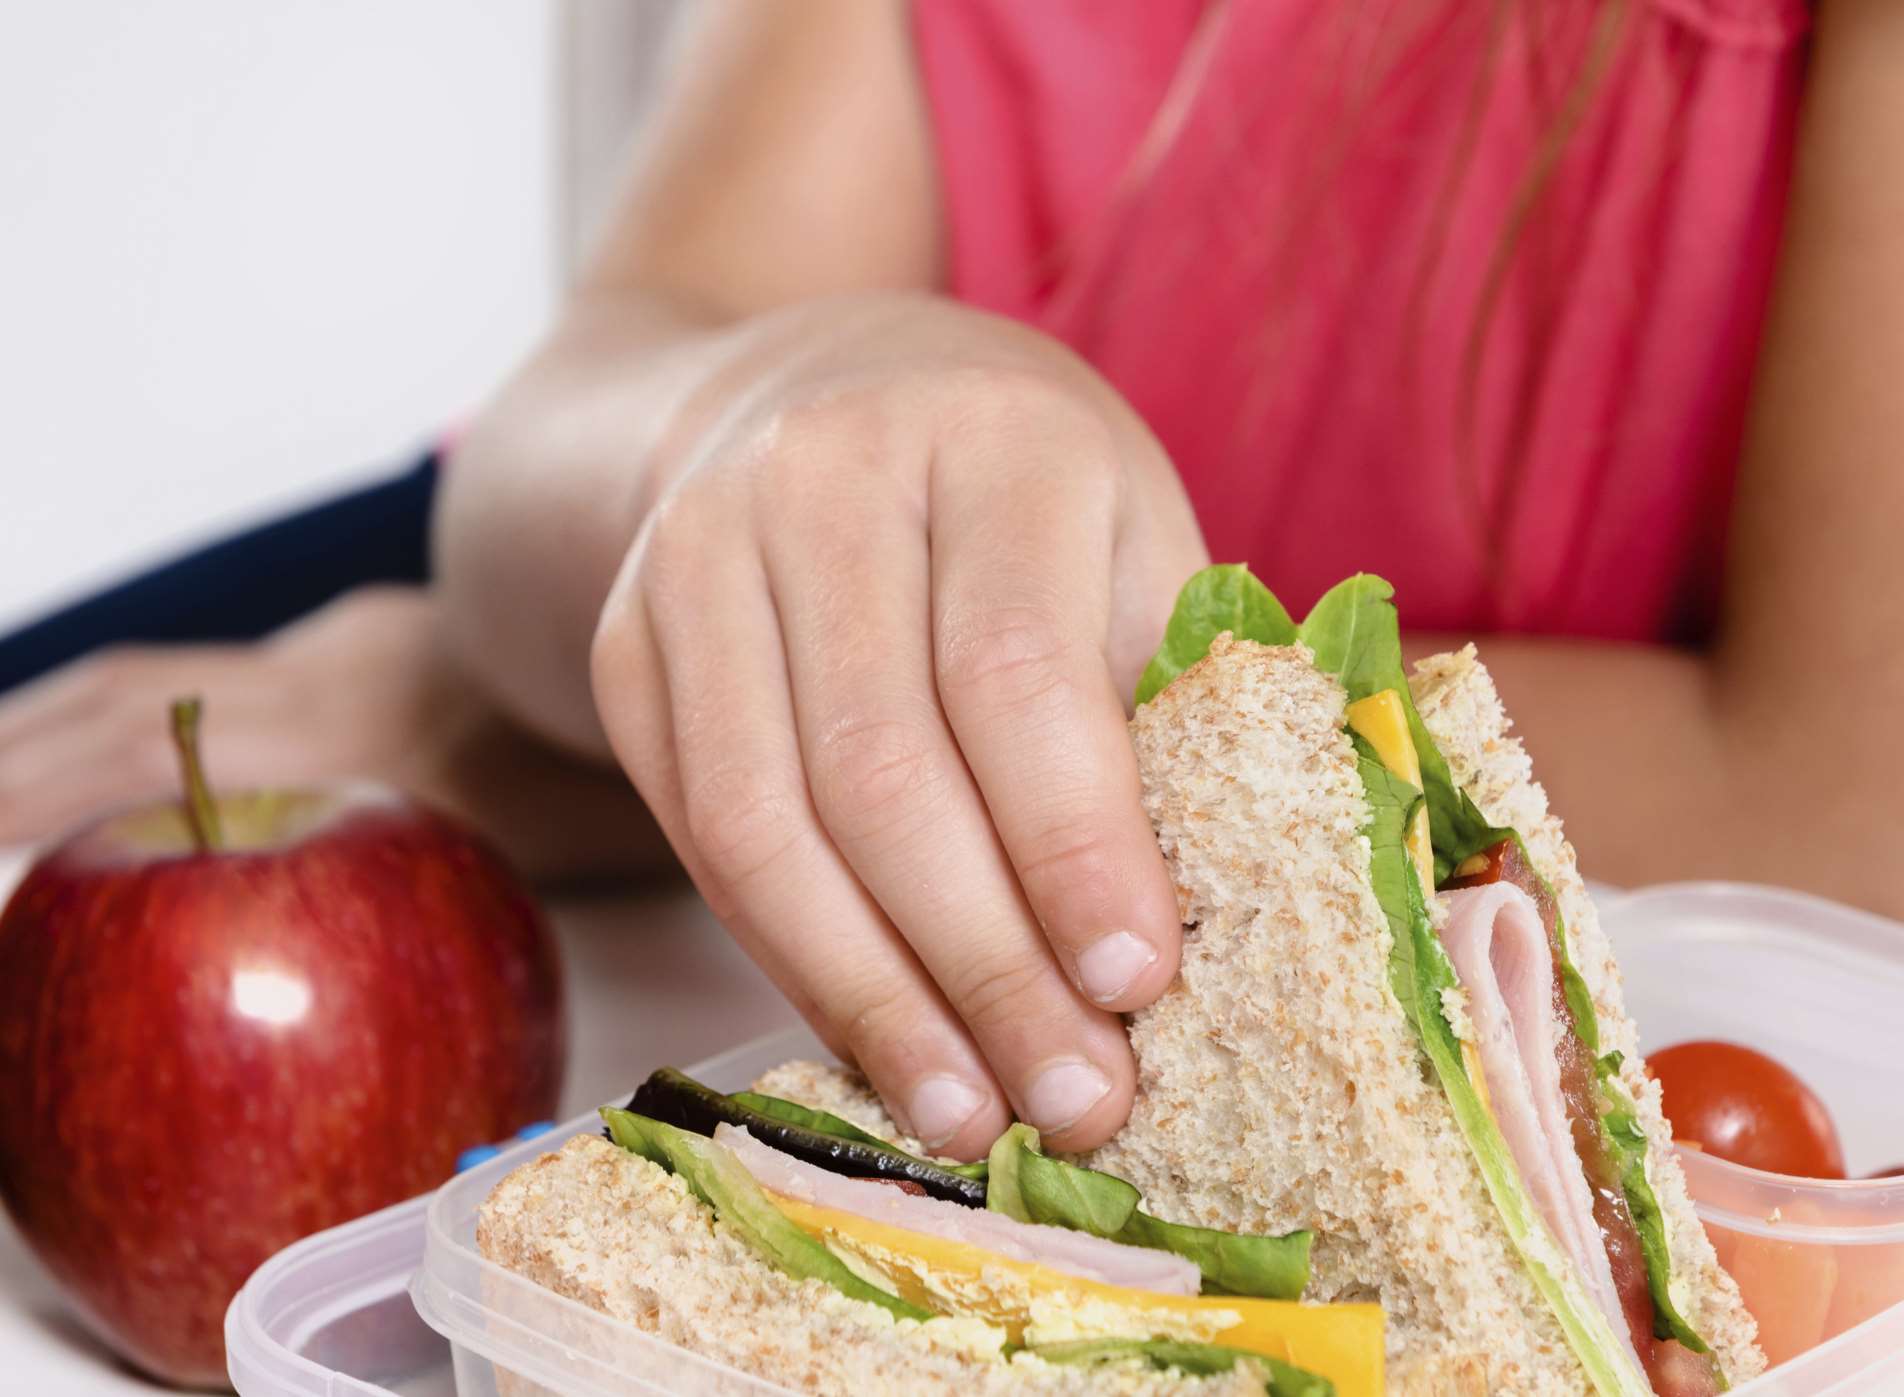 Make lunchtimes more special for your children